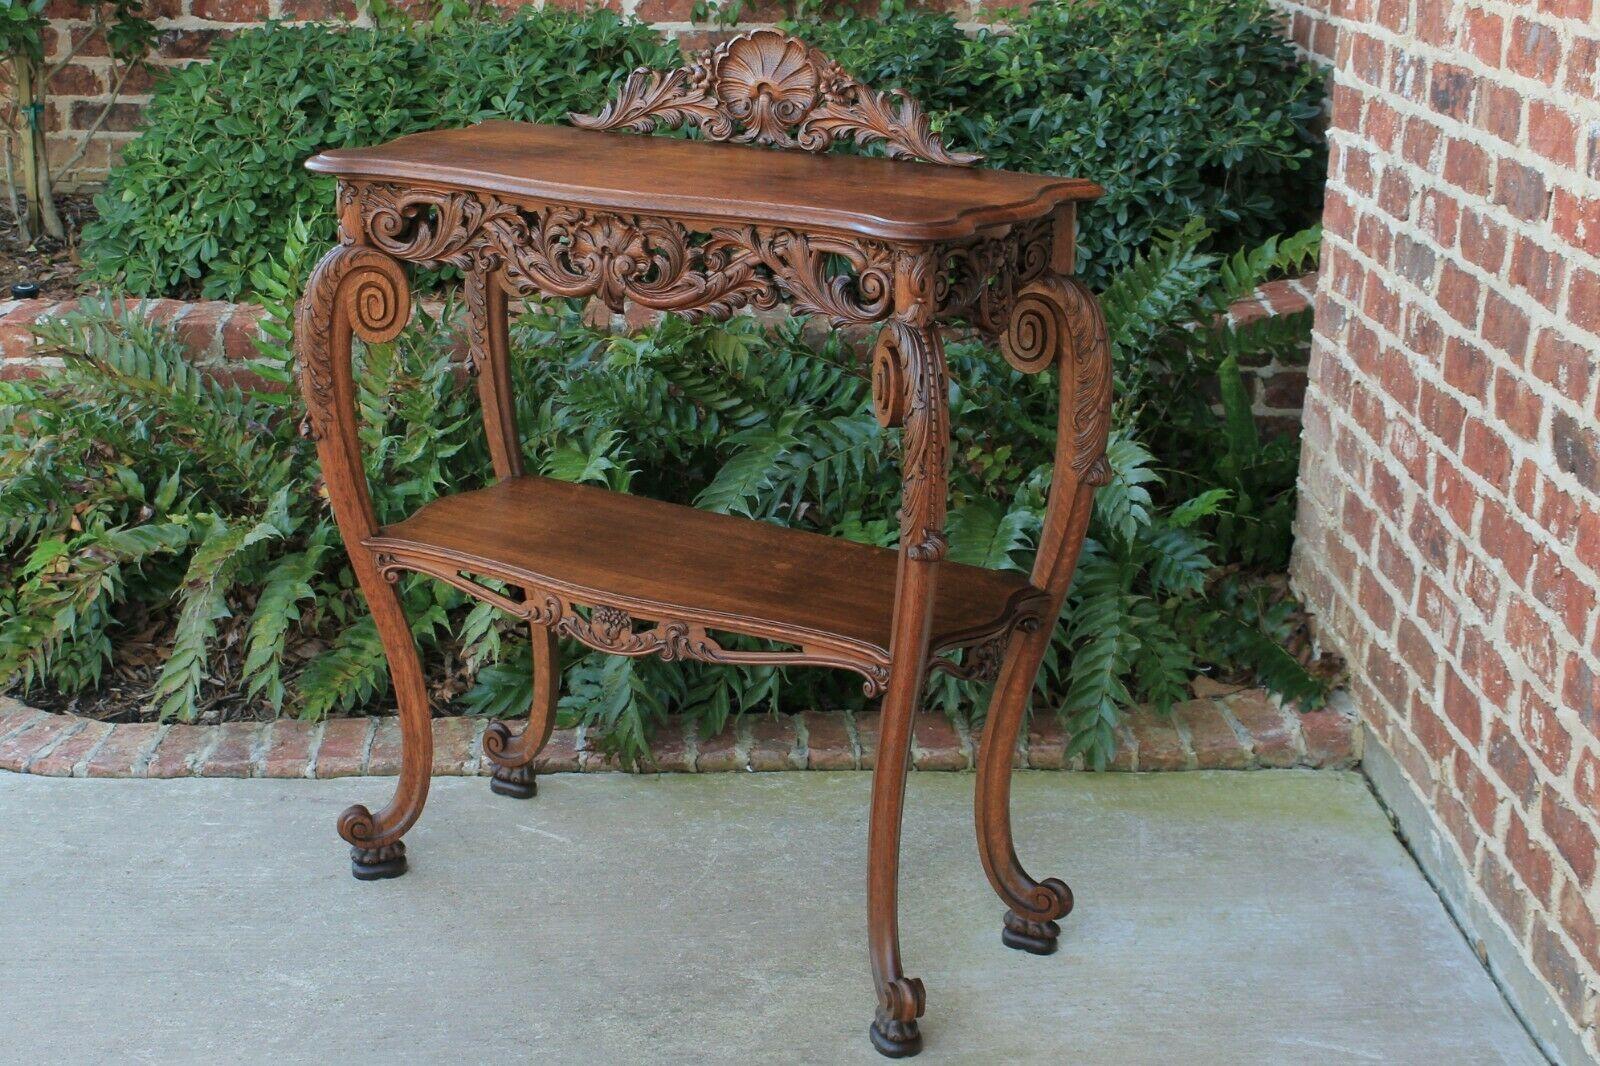 Antique French country oak 2-tier server, sideboard, buffet, console or entry table~~~c. 1880s

This is only one of multiple exquisite pieces recently received from our European shipper~~wonderful hand-carved oak pieces in the highly sought after